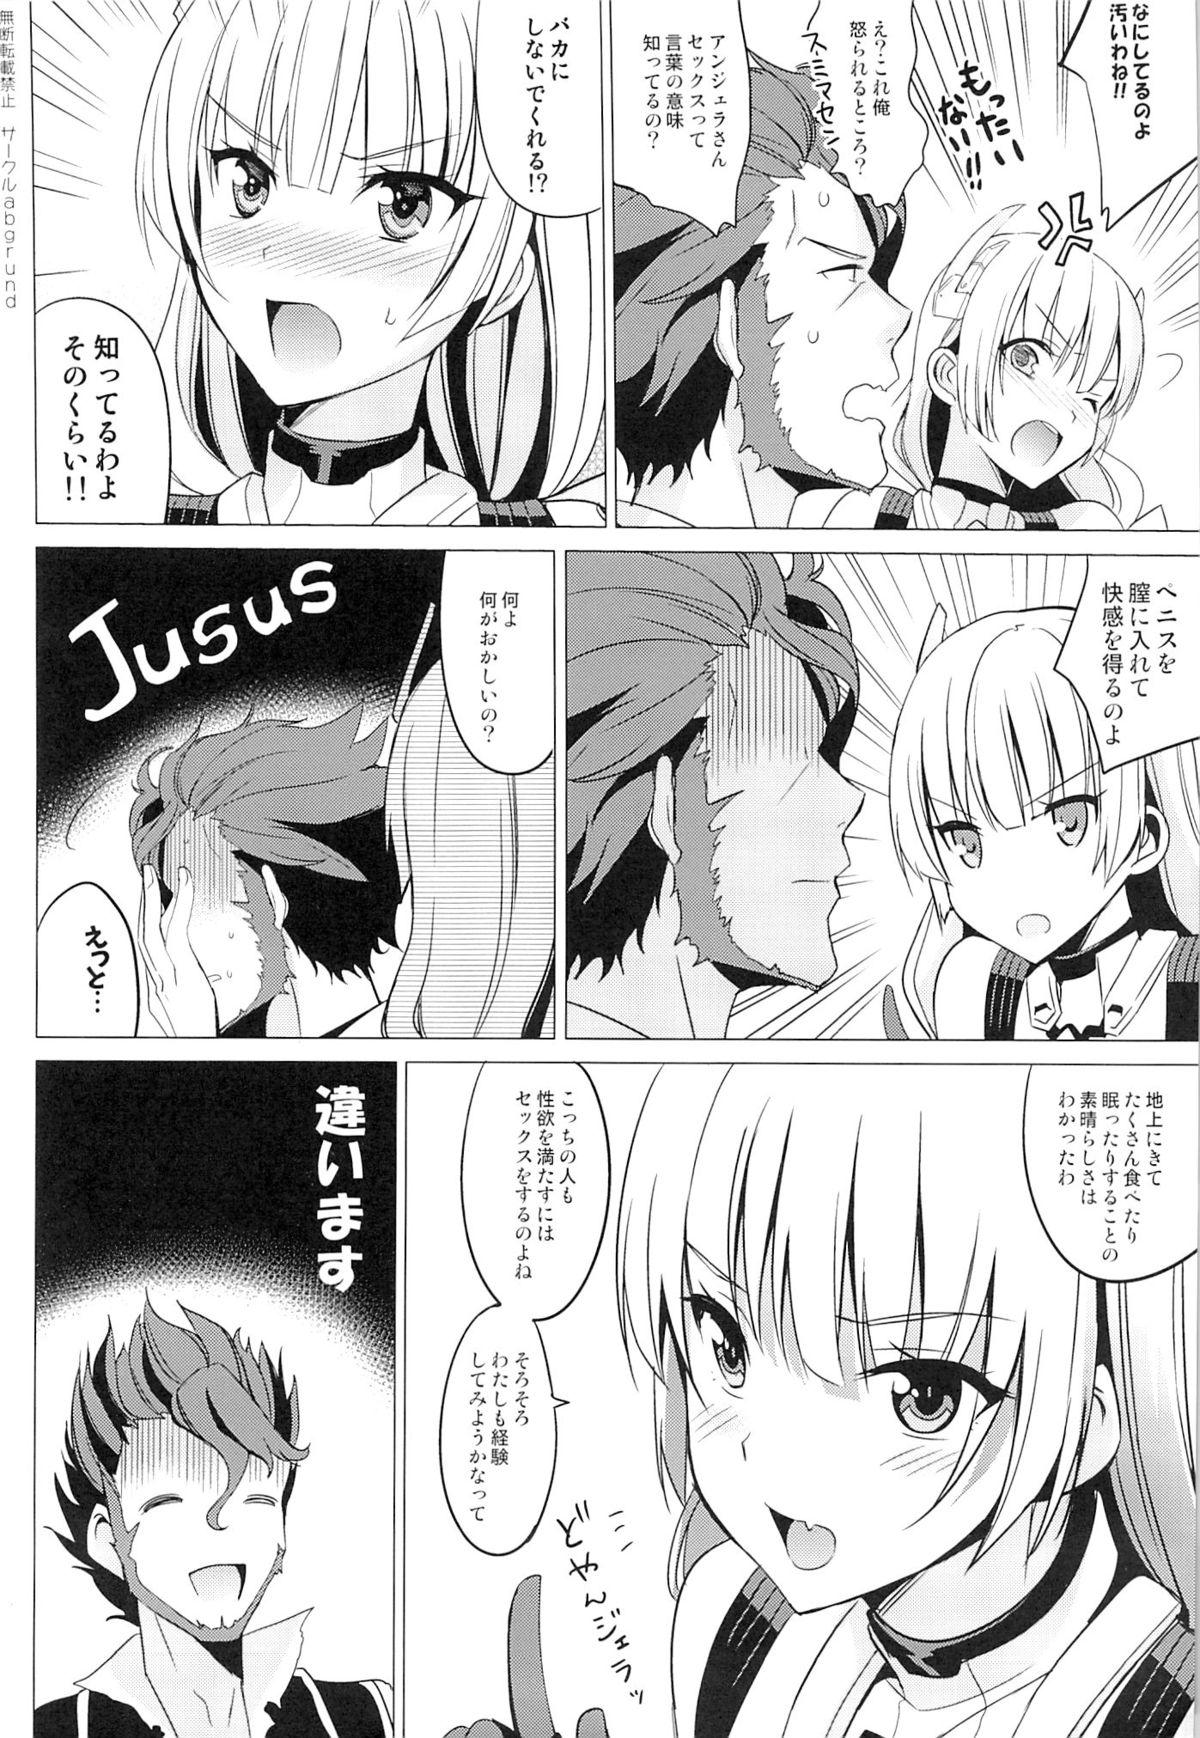 Grosso Rakuen e Youkoso - Expelled from paradise Tribute - Page 3